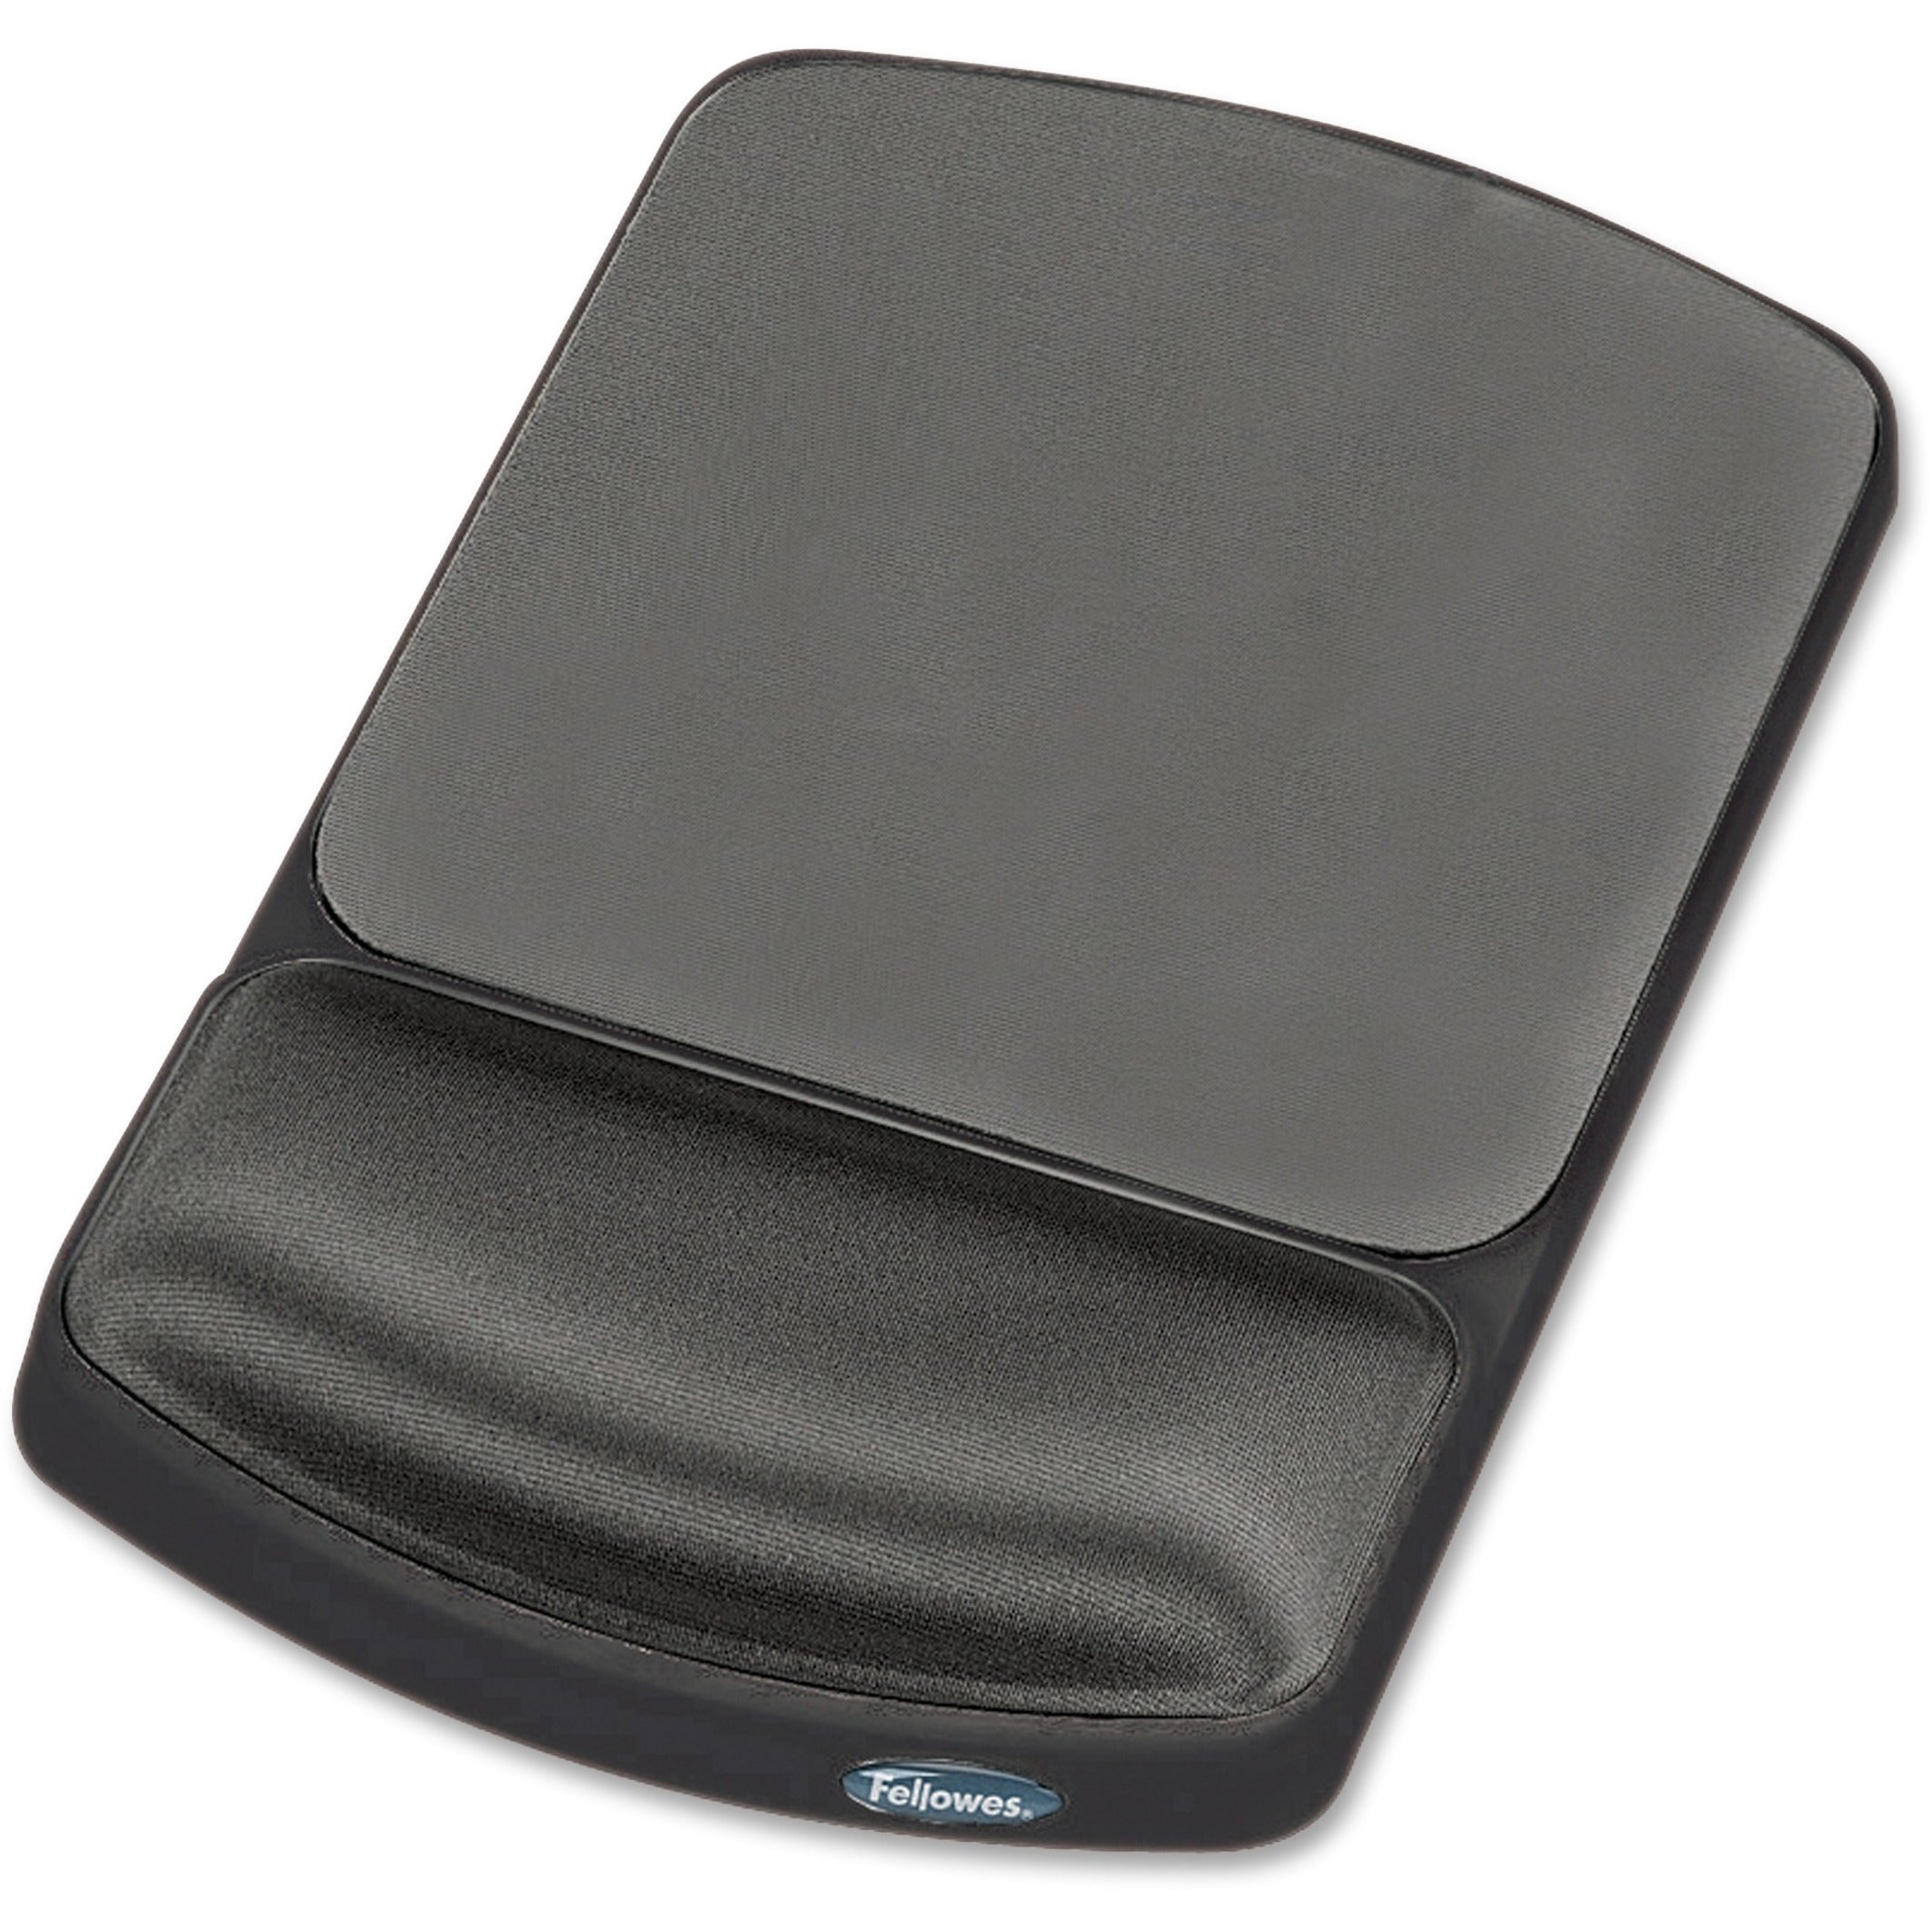 Fellowes 91741 Gel Wrist Rest and Mouse Pad, Ergonomic, Non-skid Base, Pressure Reliever